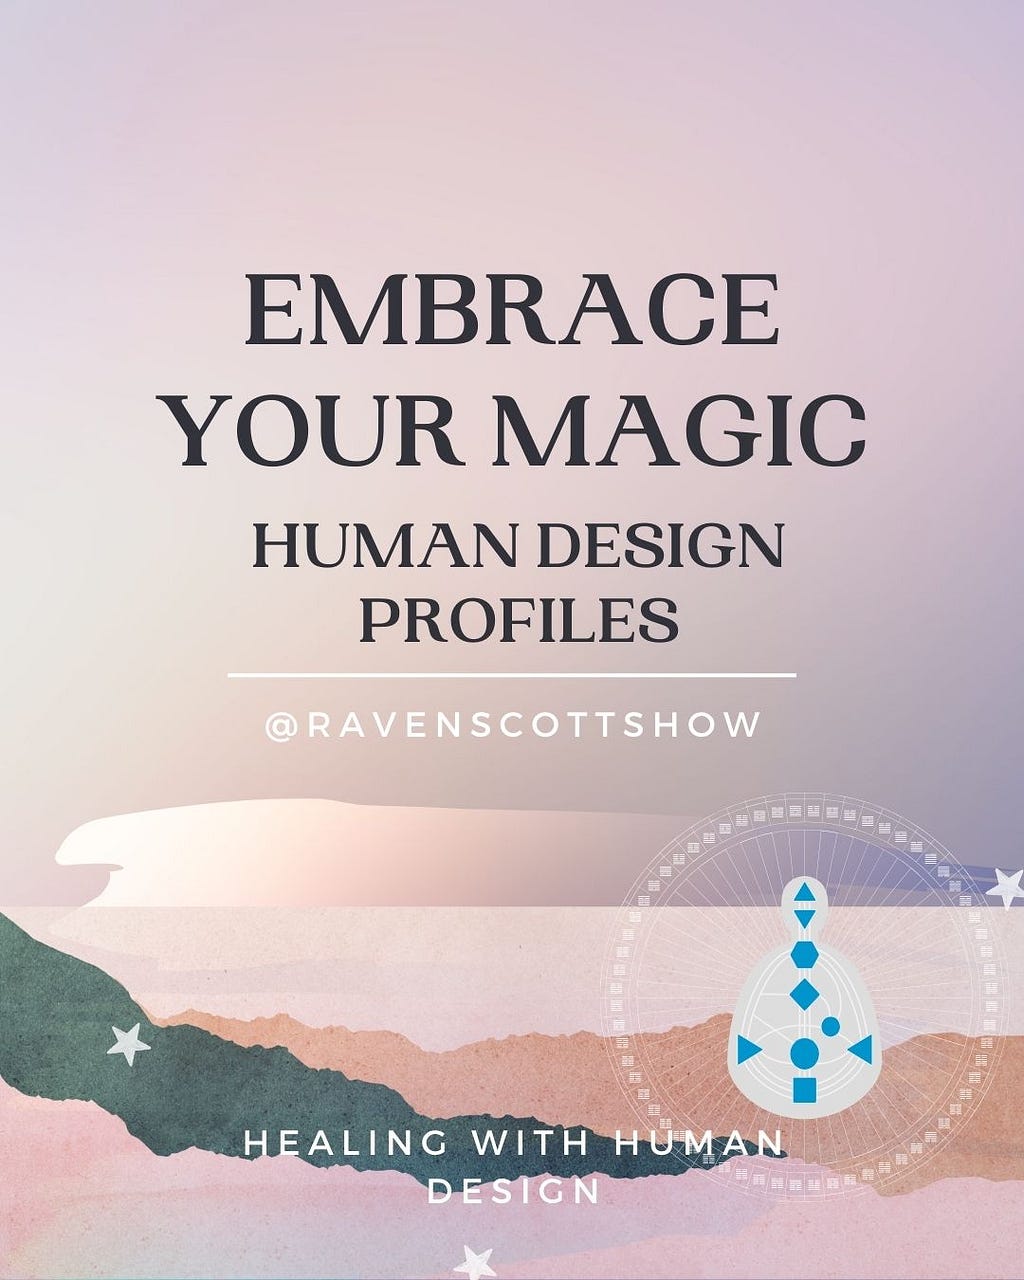 light purple or mauve background with Human Design mandala body graph graphic and text “Embrace your magic Human Design profiles @ravenscottshow” Healing with Human Design”.